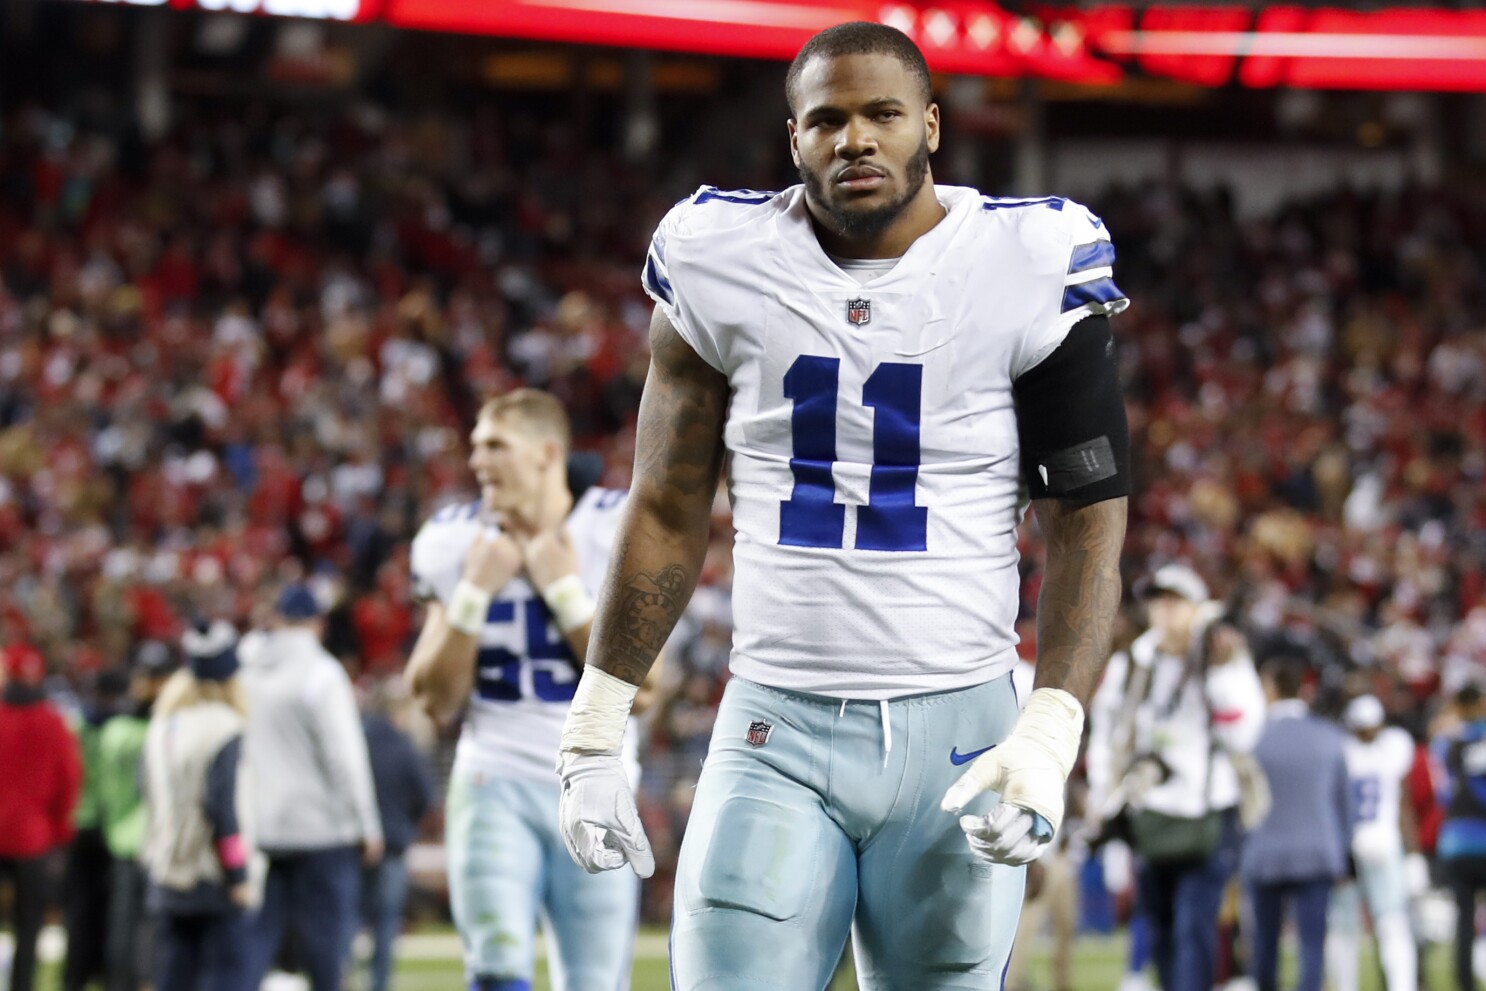 Top 10 NFL Defensive Player of the Year candidates: Cowboys